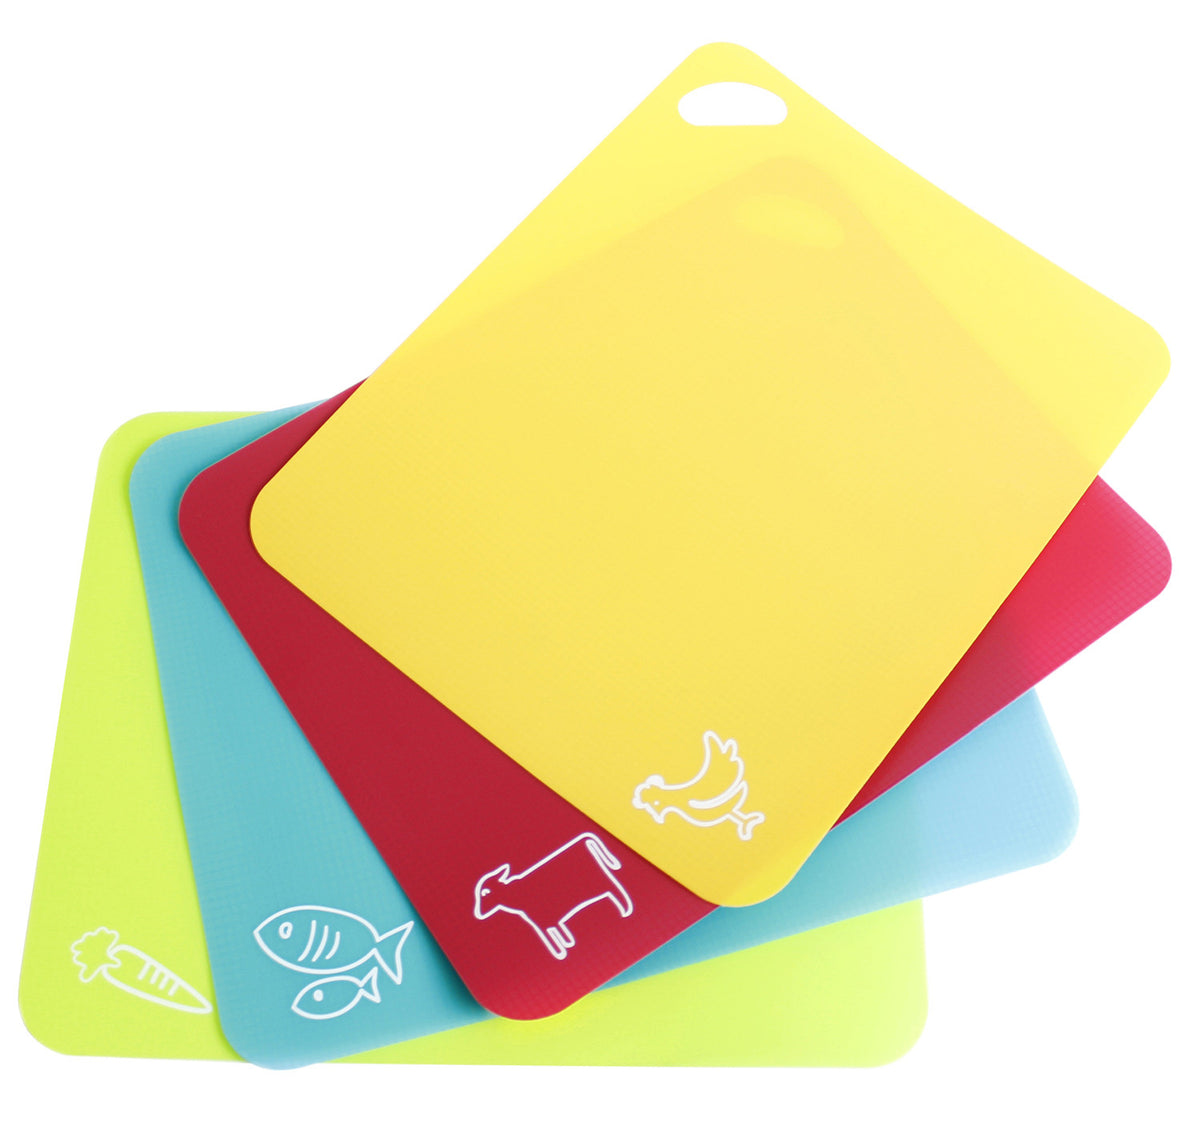 Flexible Cutting Mats 4 Piece With Non Slip Grip In Multicolor 